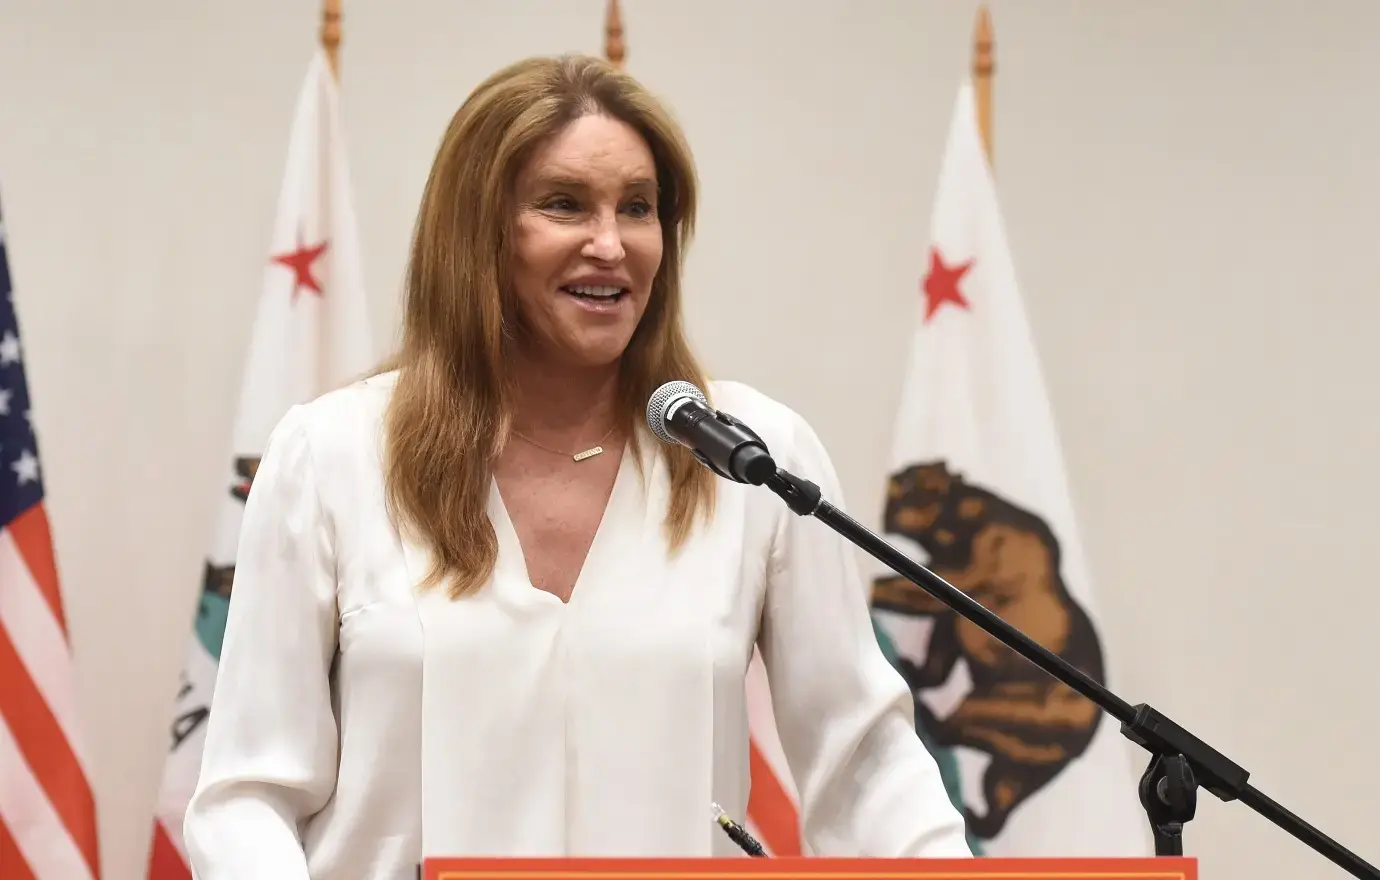 Caitlyn Jenner Faces Backlash After Slamming Nike Deal With Transwoman